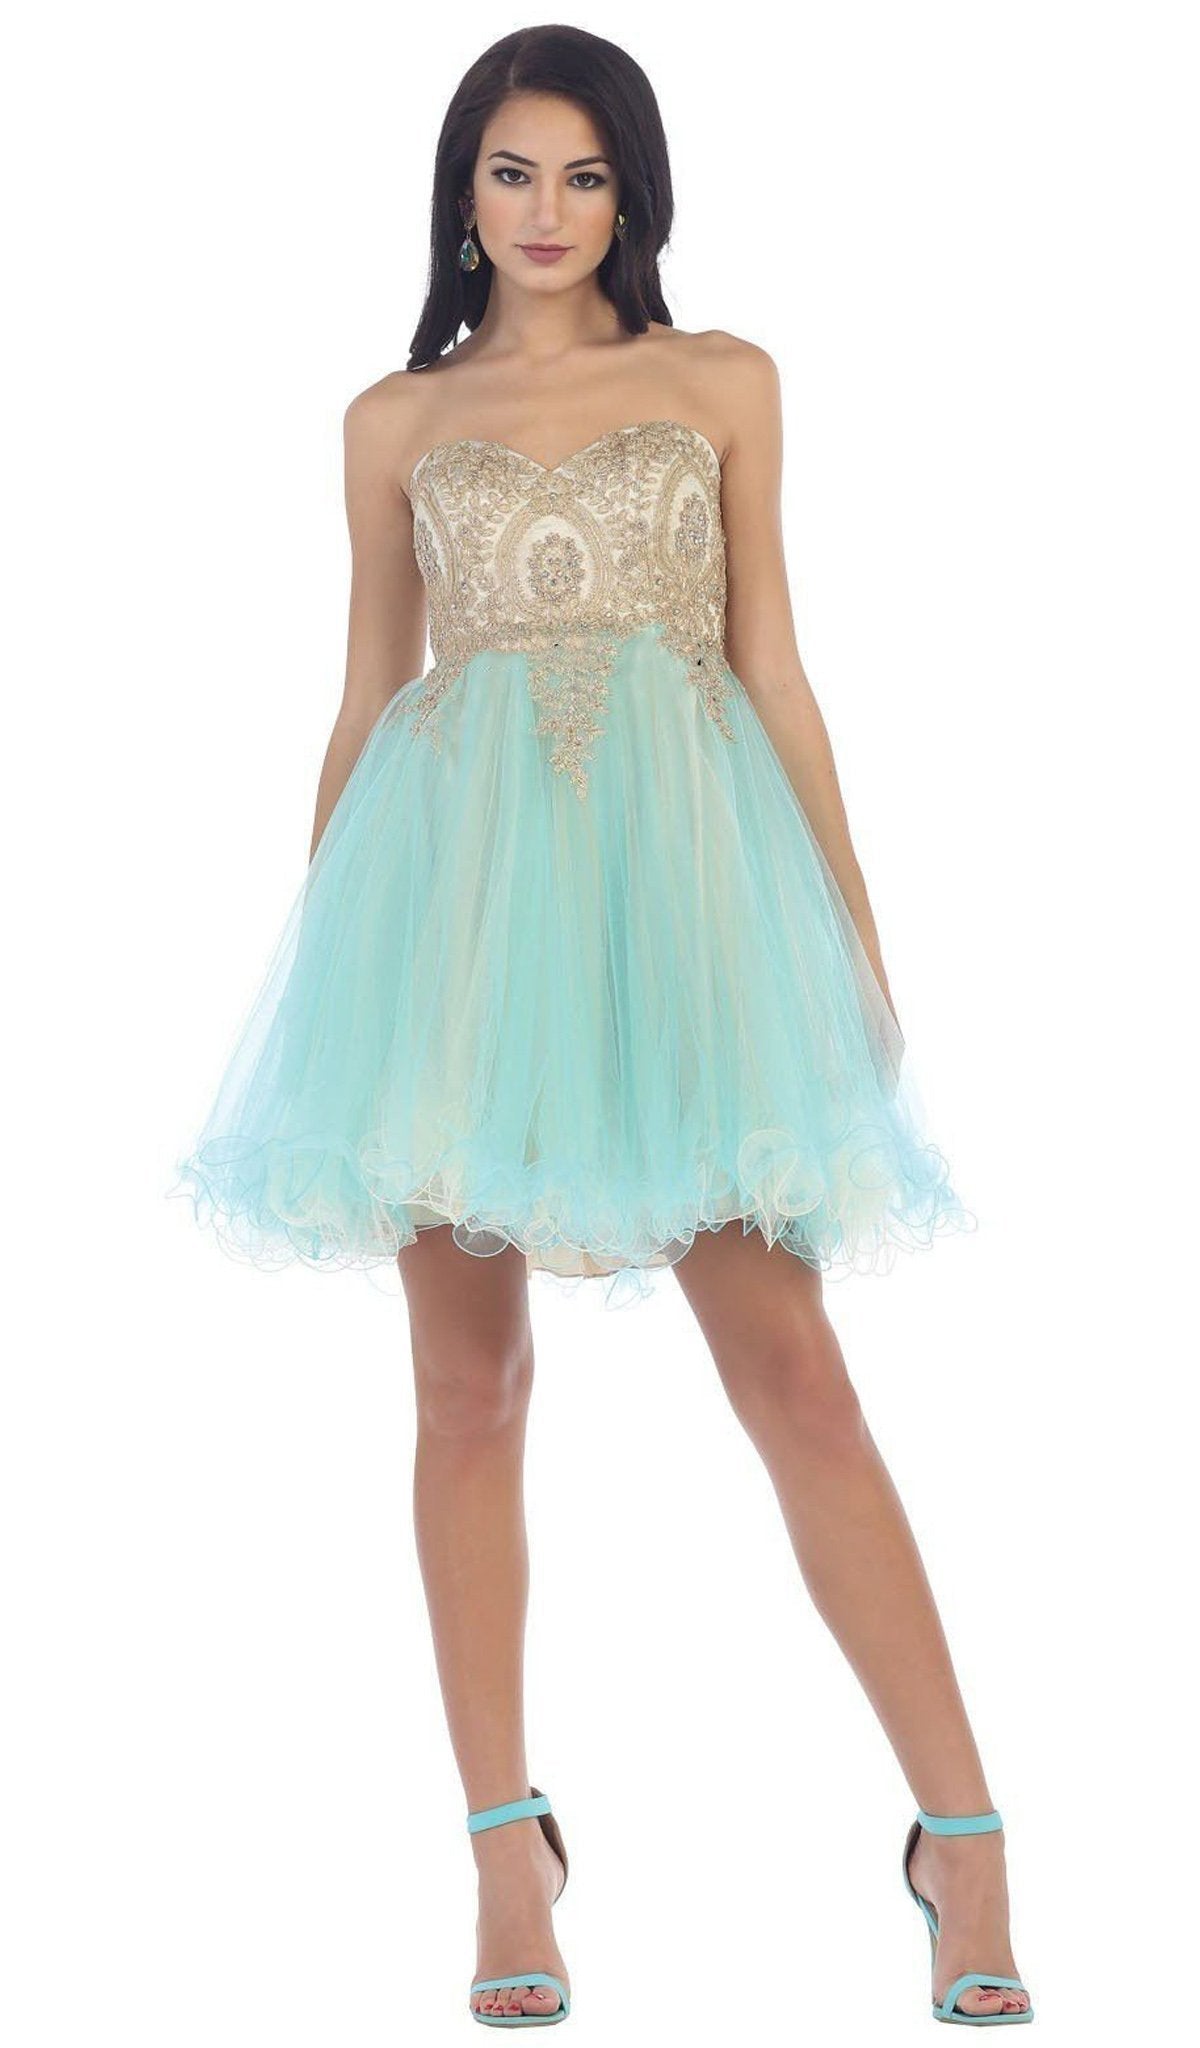 May Queen - MQ-1286 Strapless Appliqued Cocktail Dress Special Occasion Dress 2 / Aqua/Nude